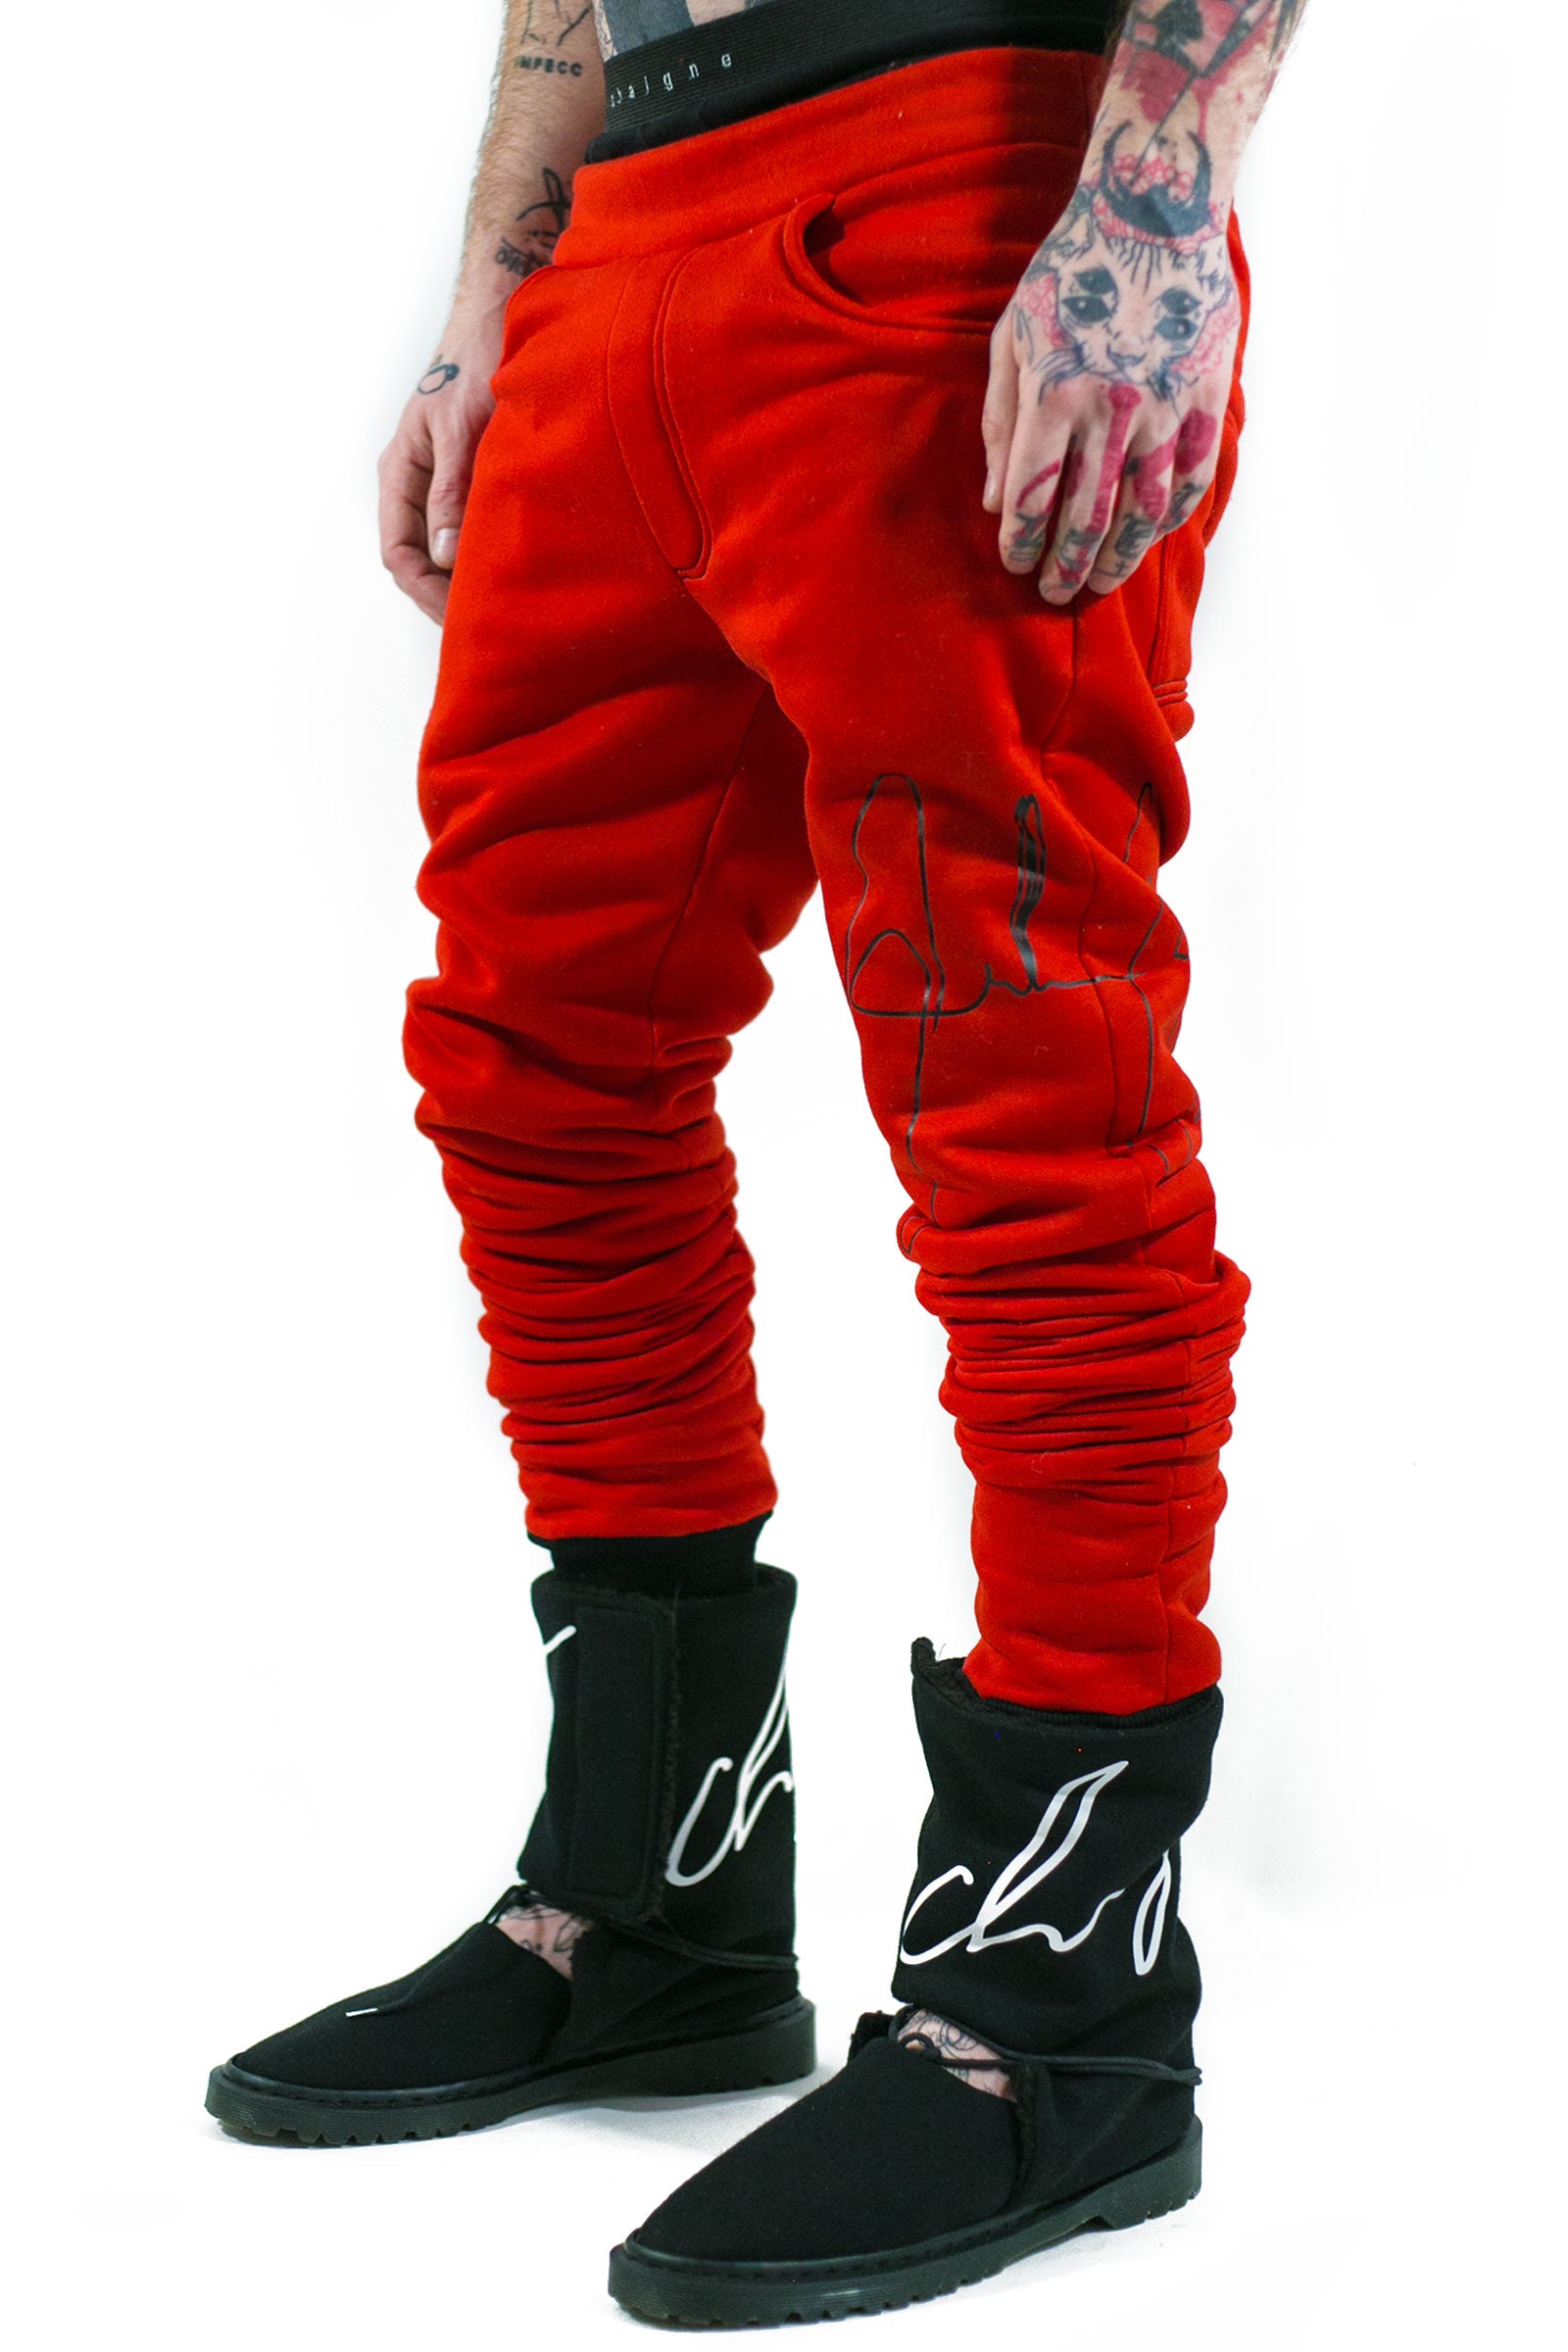 SS2022 Signature red joggers